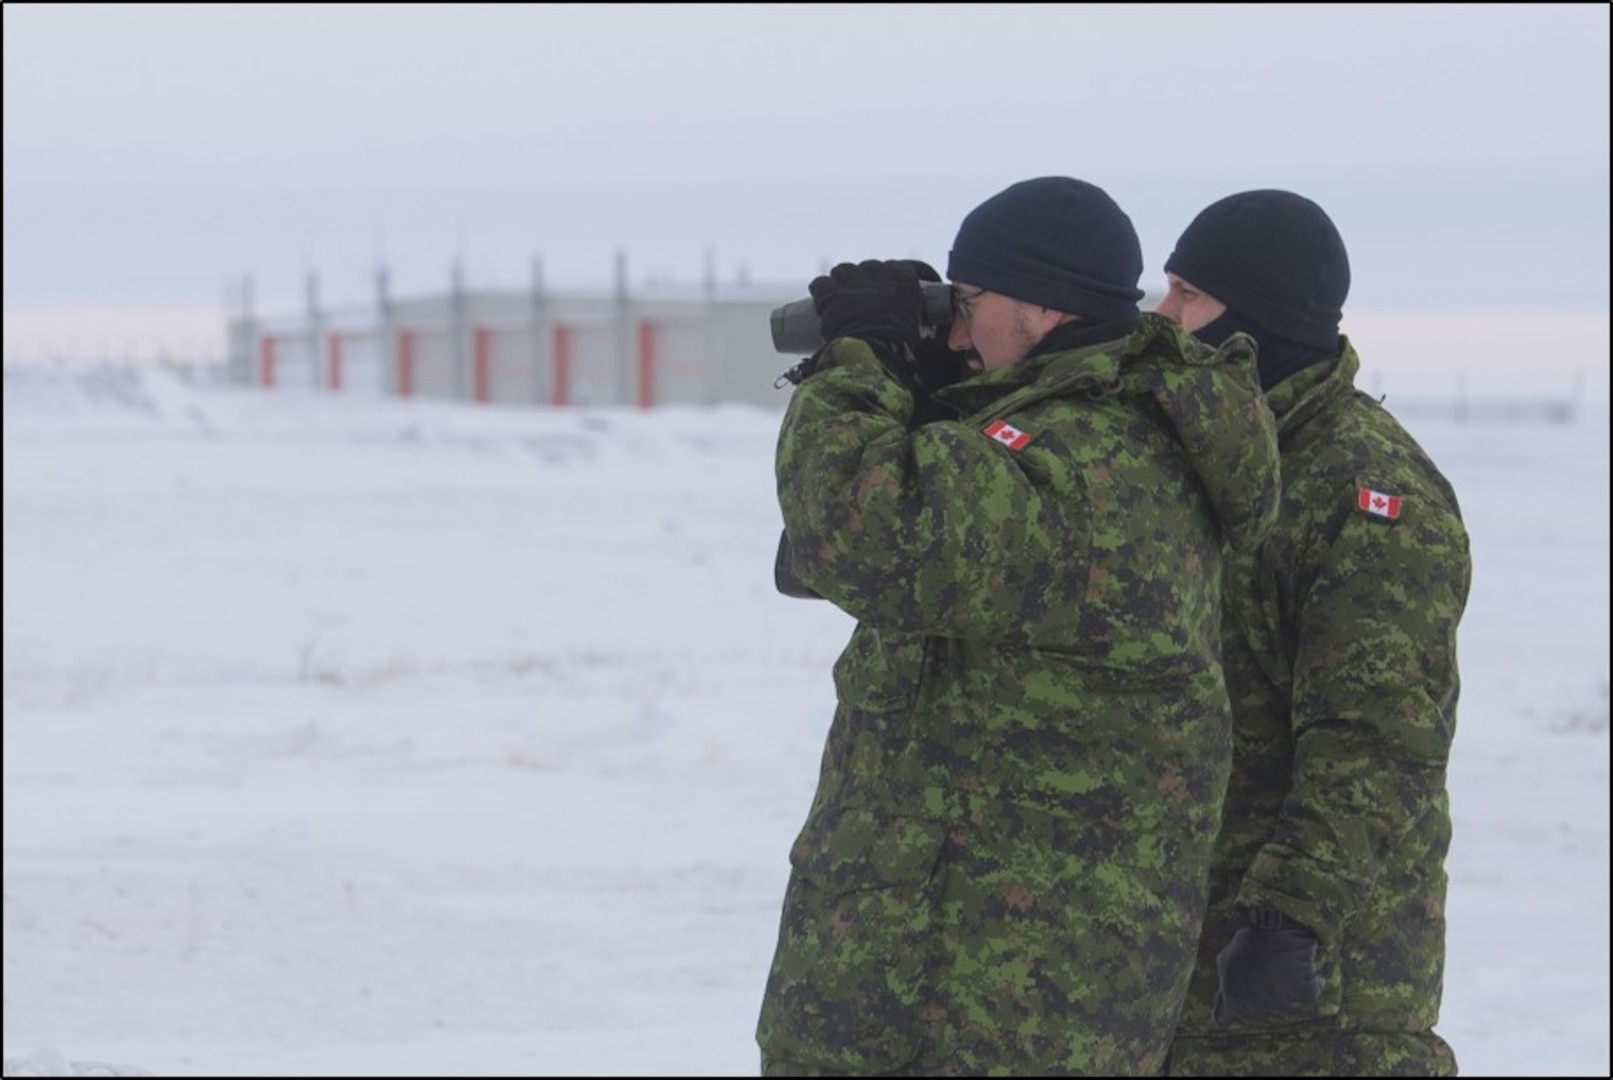 Two members of 2 Air Expeditionary Wing evaluate airfield infrastructure to identify a suitable location for a mobile radar system, during their survey visit to Rankin Inlet on January 29, 2020.